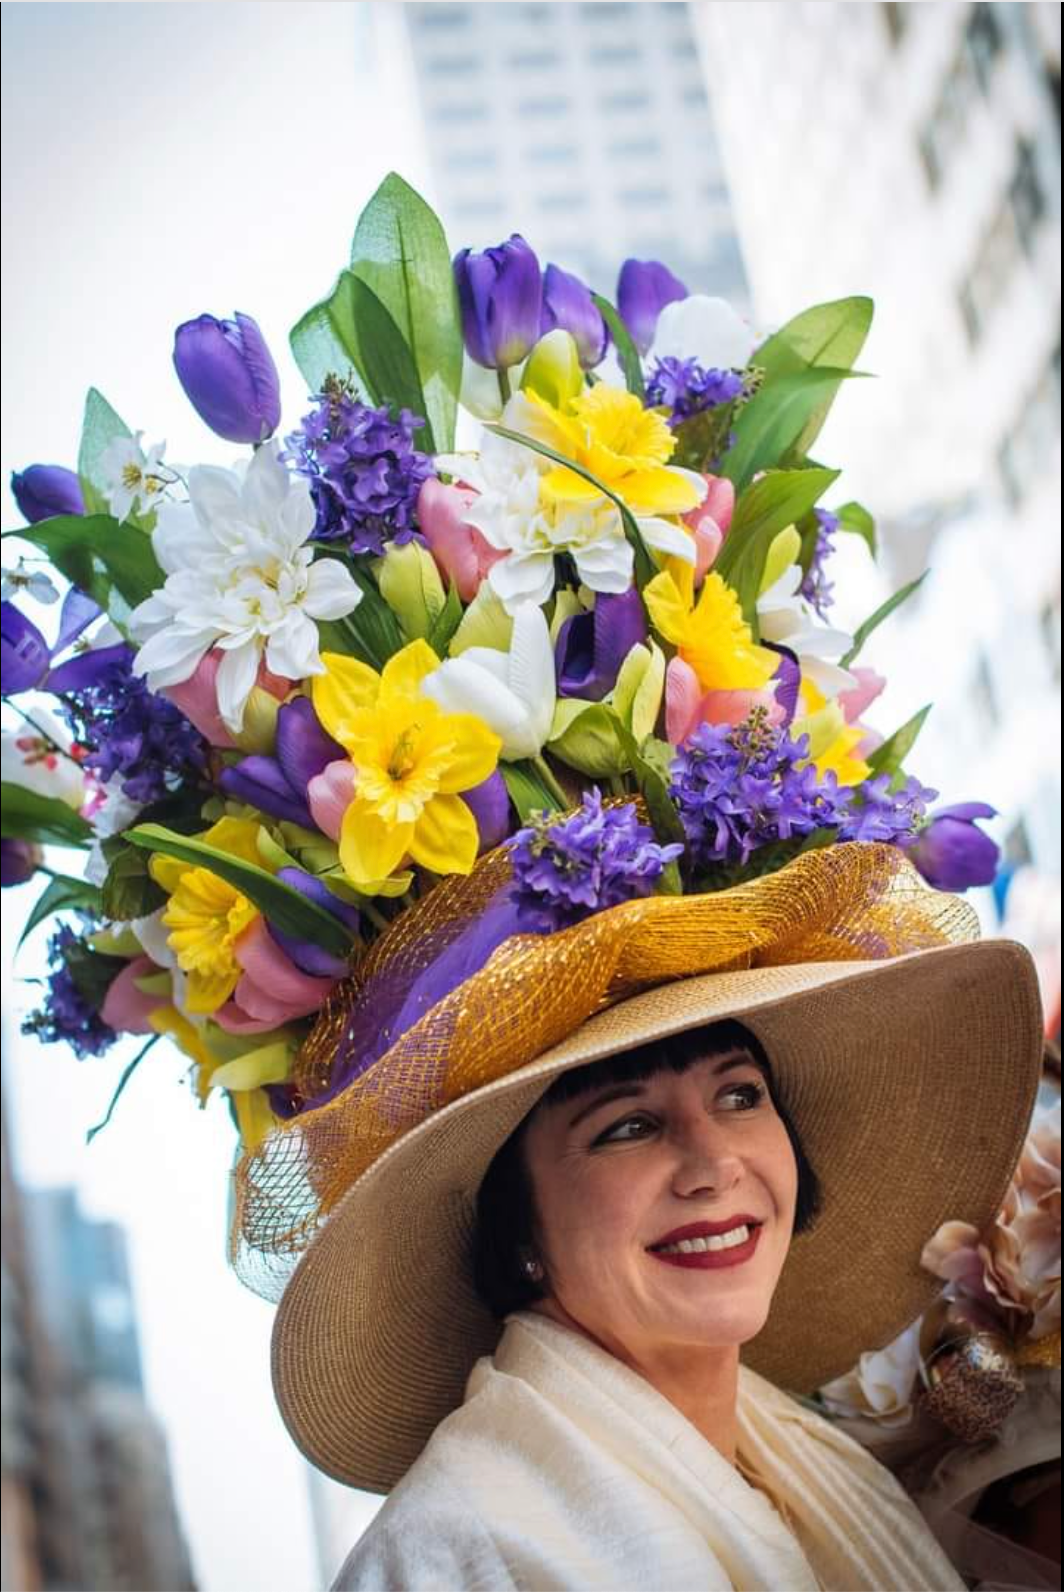 An absolute unit of a decorated easter bonnet. The crown of wide brimmed straw hat is completely obscured by a tower of purple, white, and yellow flowers.